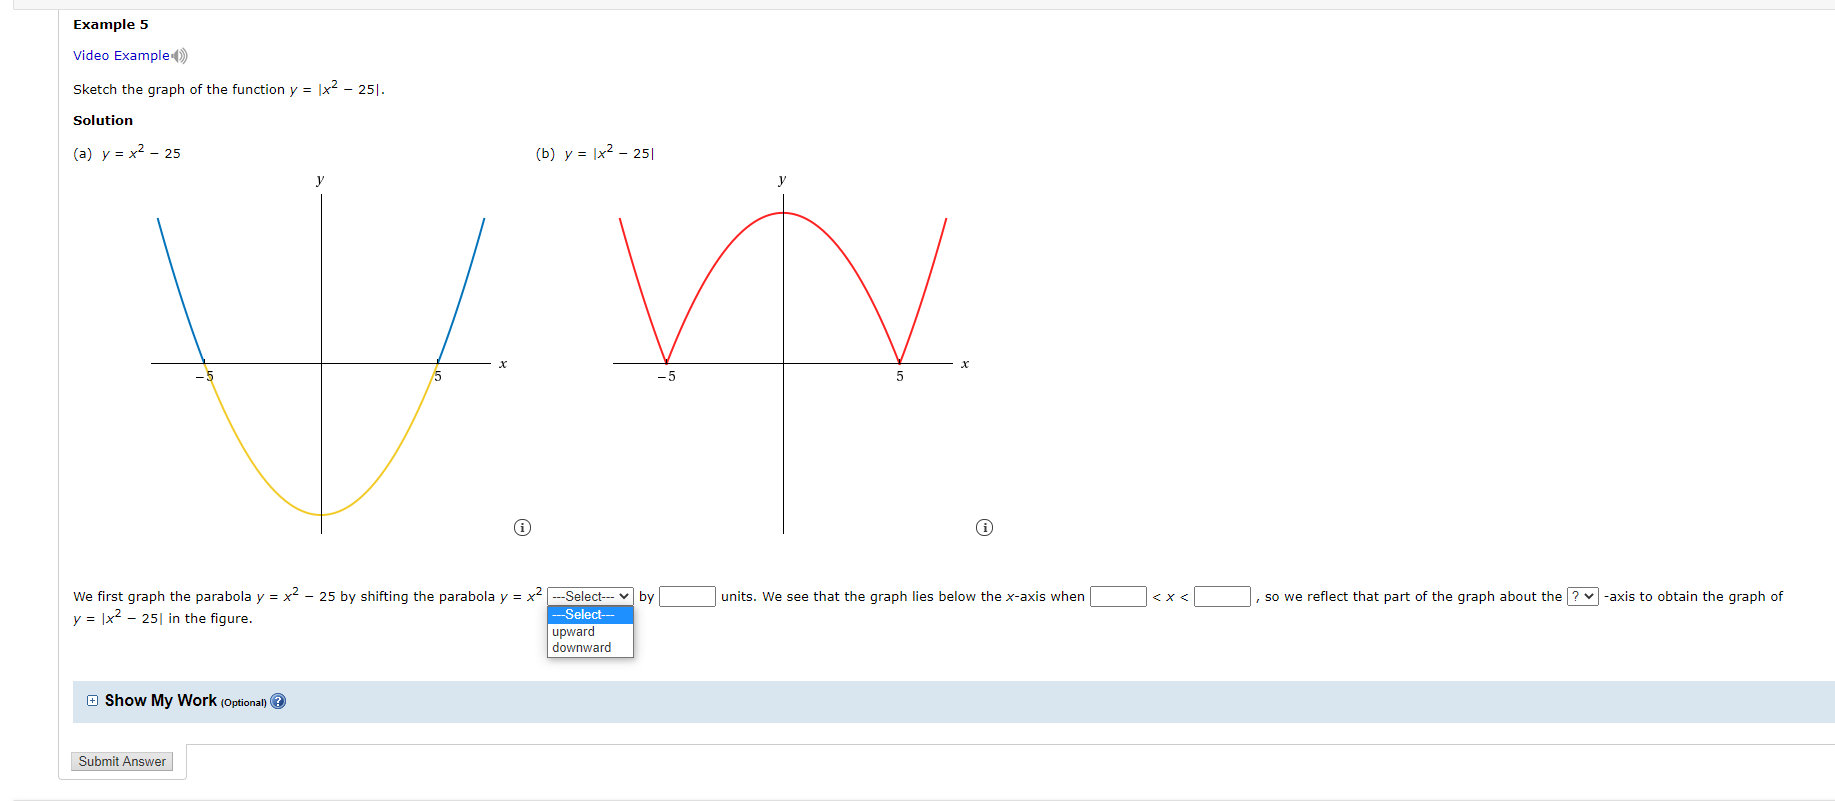 Sketch the graph of the function y = |x? - 25|.
